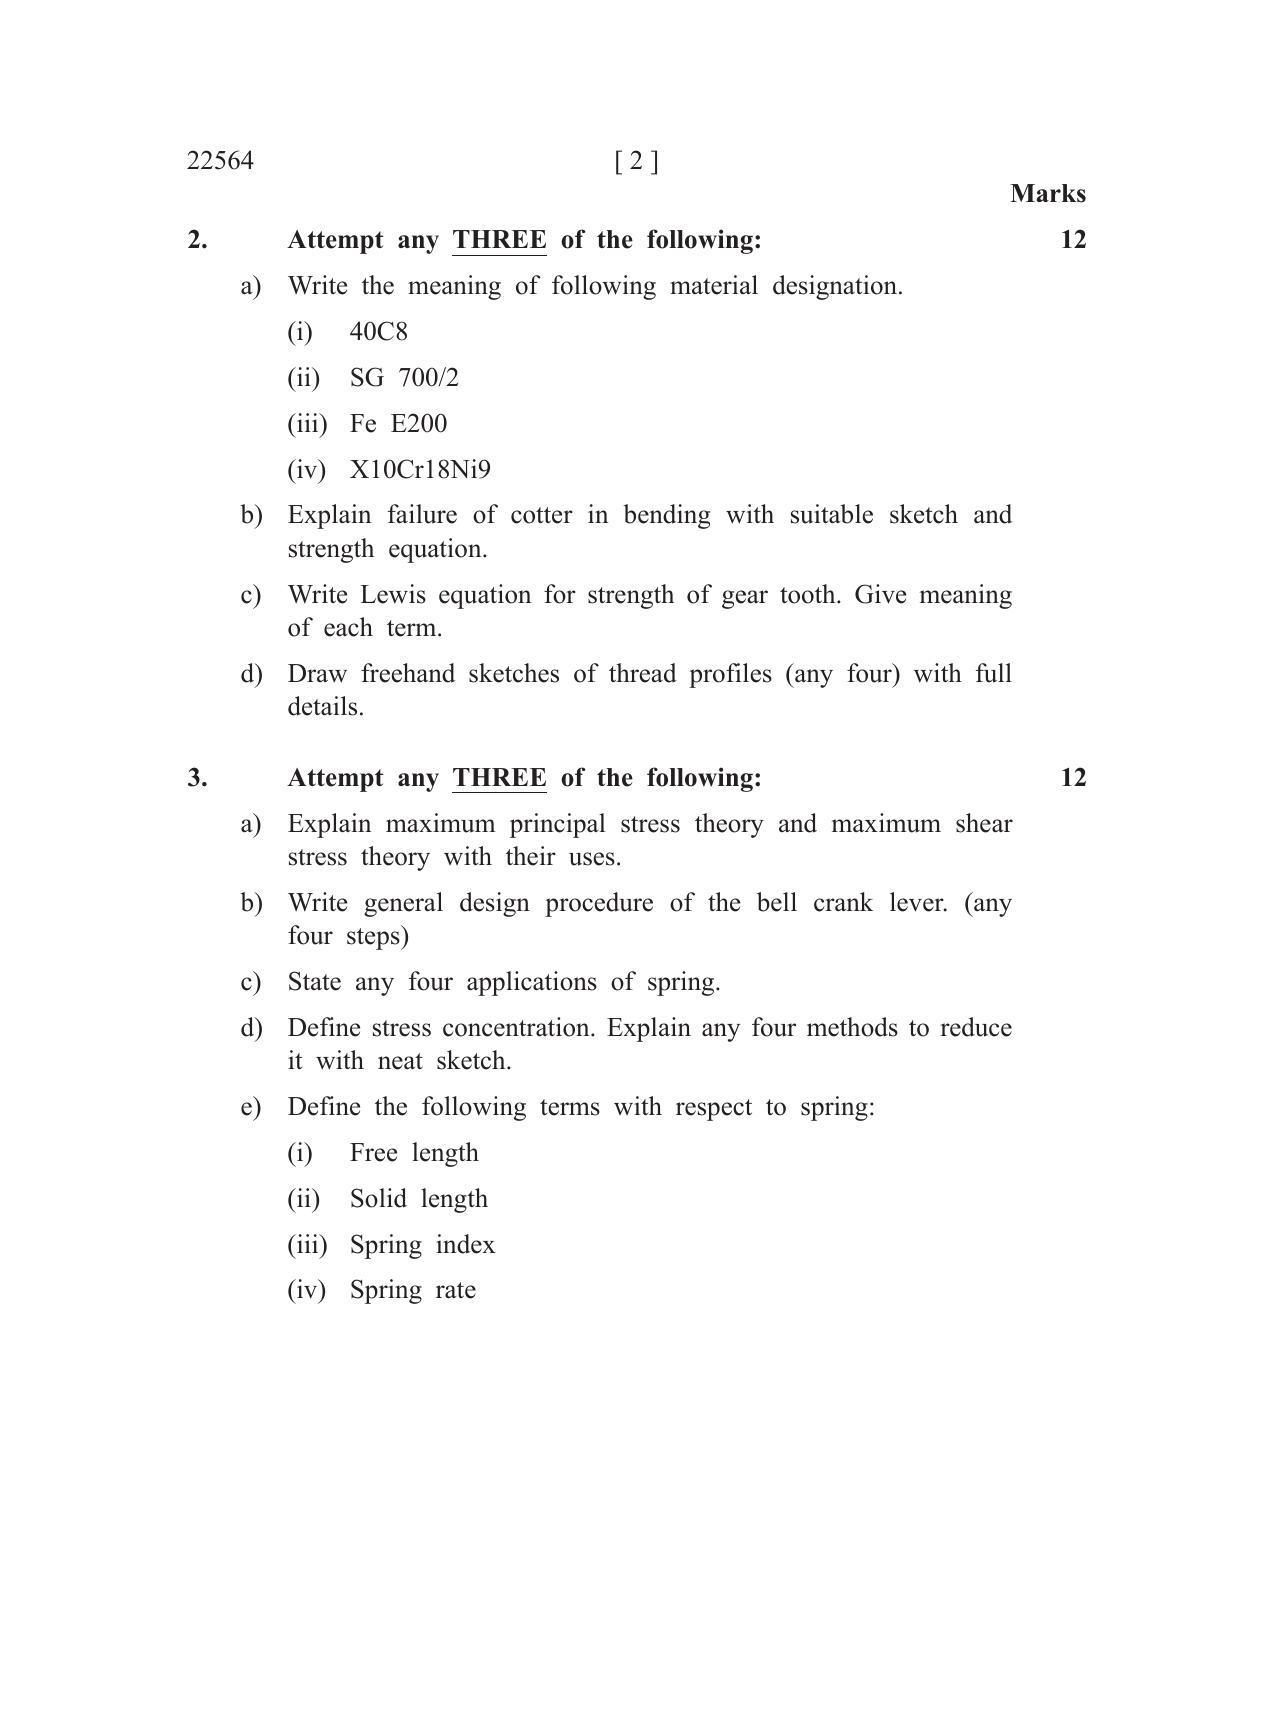 MSBTE Question Paper - 2019 - Elements of Machine Design - Page 2